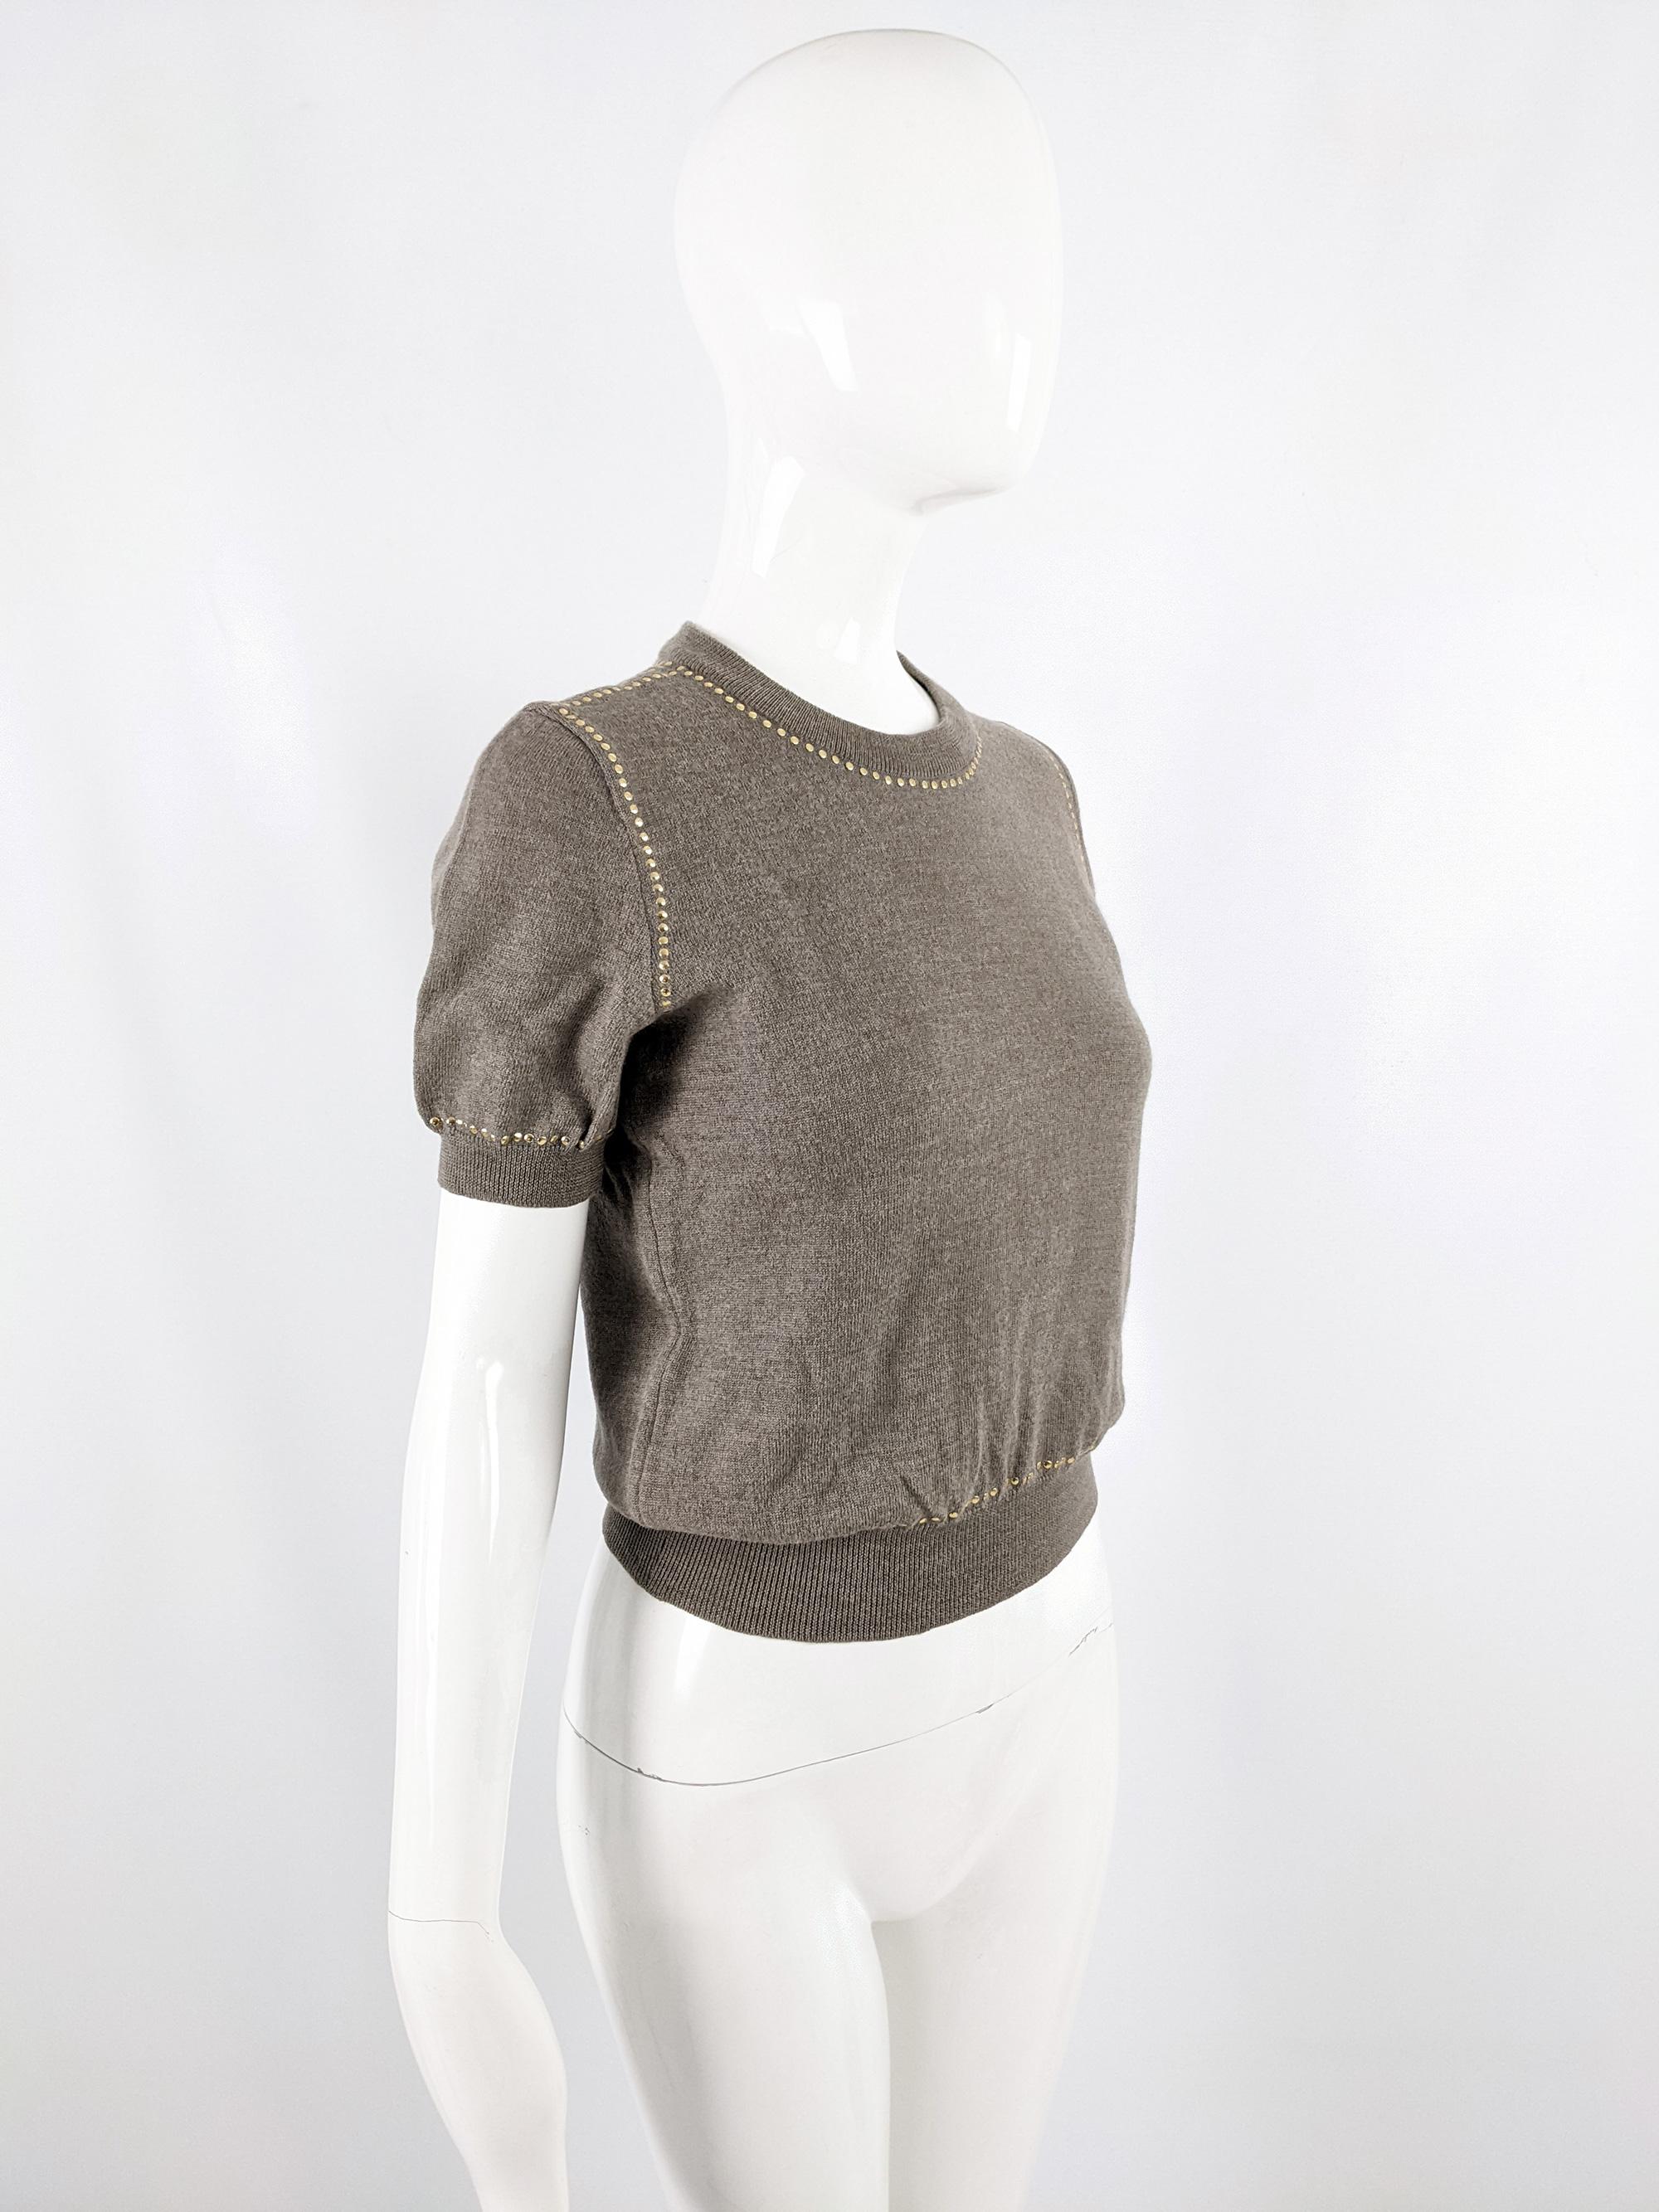 Gray Valentino Vintage Taupe Wool Studded Puff Sleeve Knitwear Sweater Jumper, 1980s For Sale